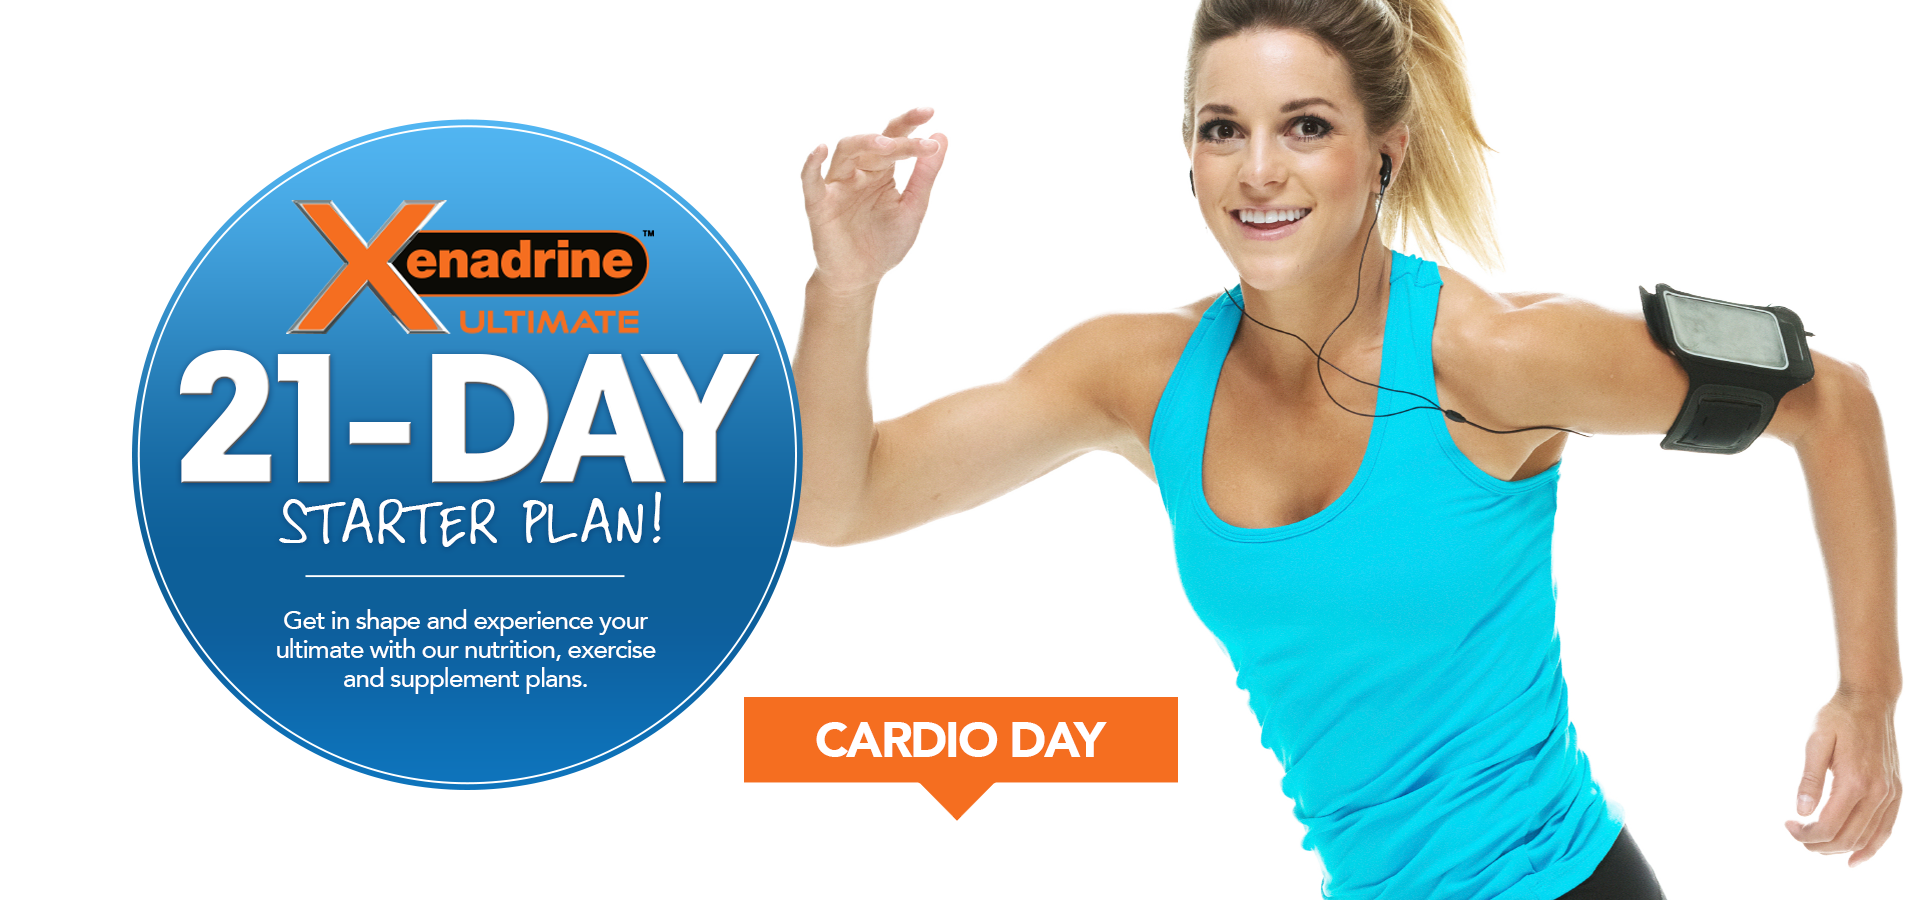 cardio-day-feature